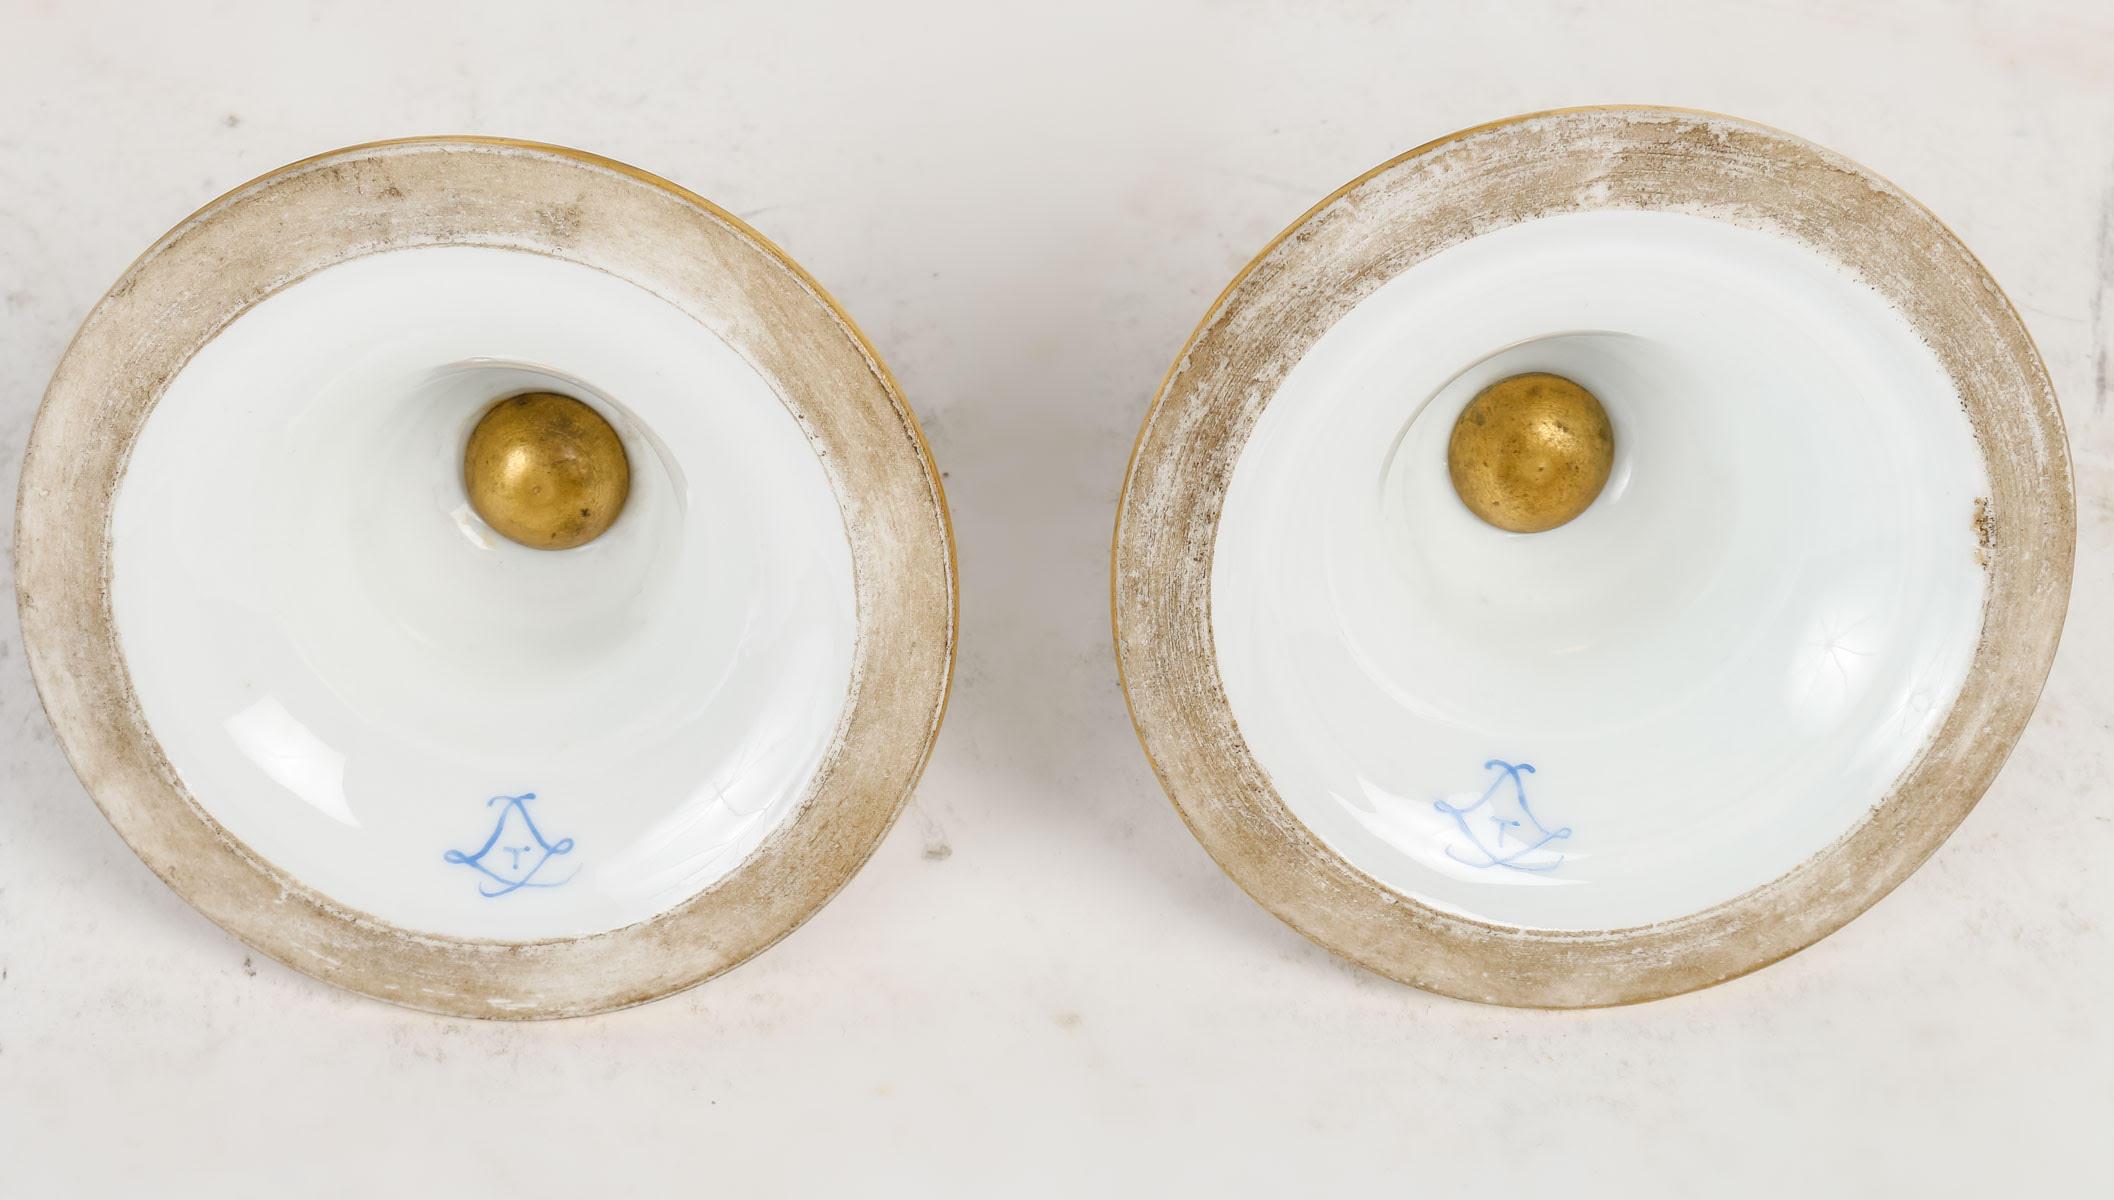 Bronze Pair of Perfume Burners from the Manufacture de Sèvres, Early 20th Century.